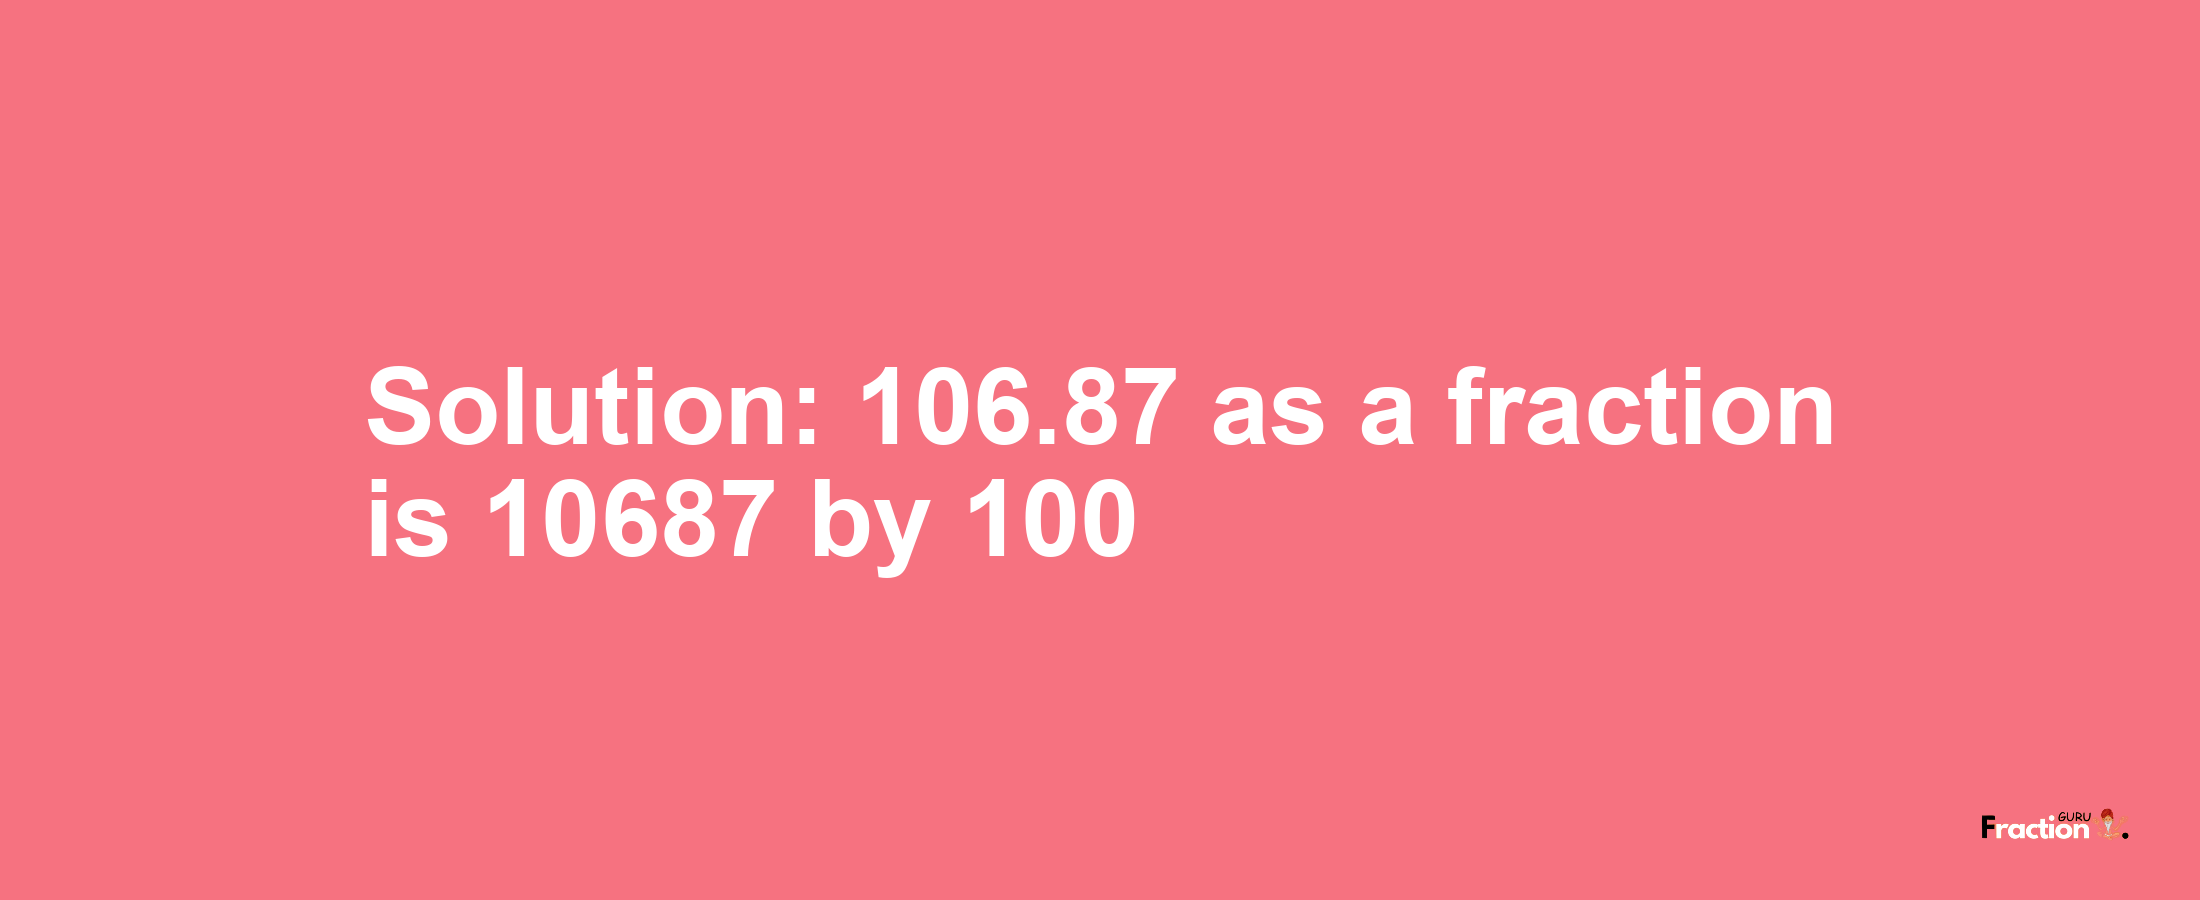 Solution:106.87 as a fraction is 10687/100